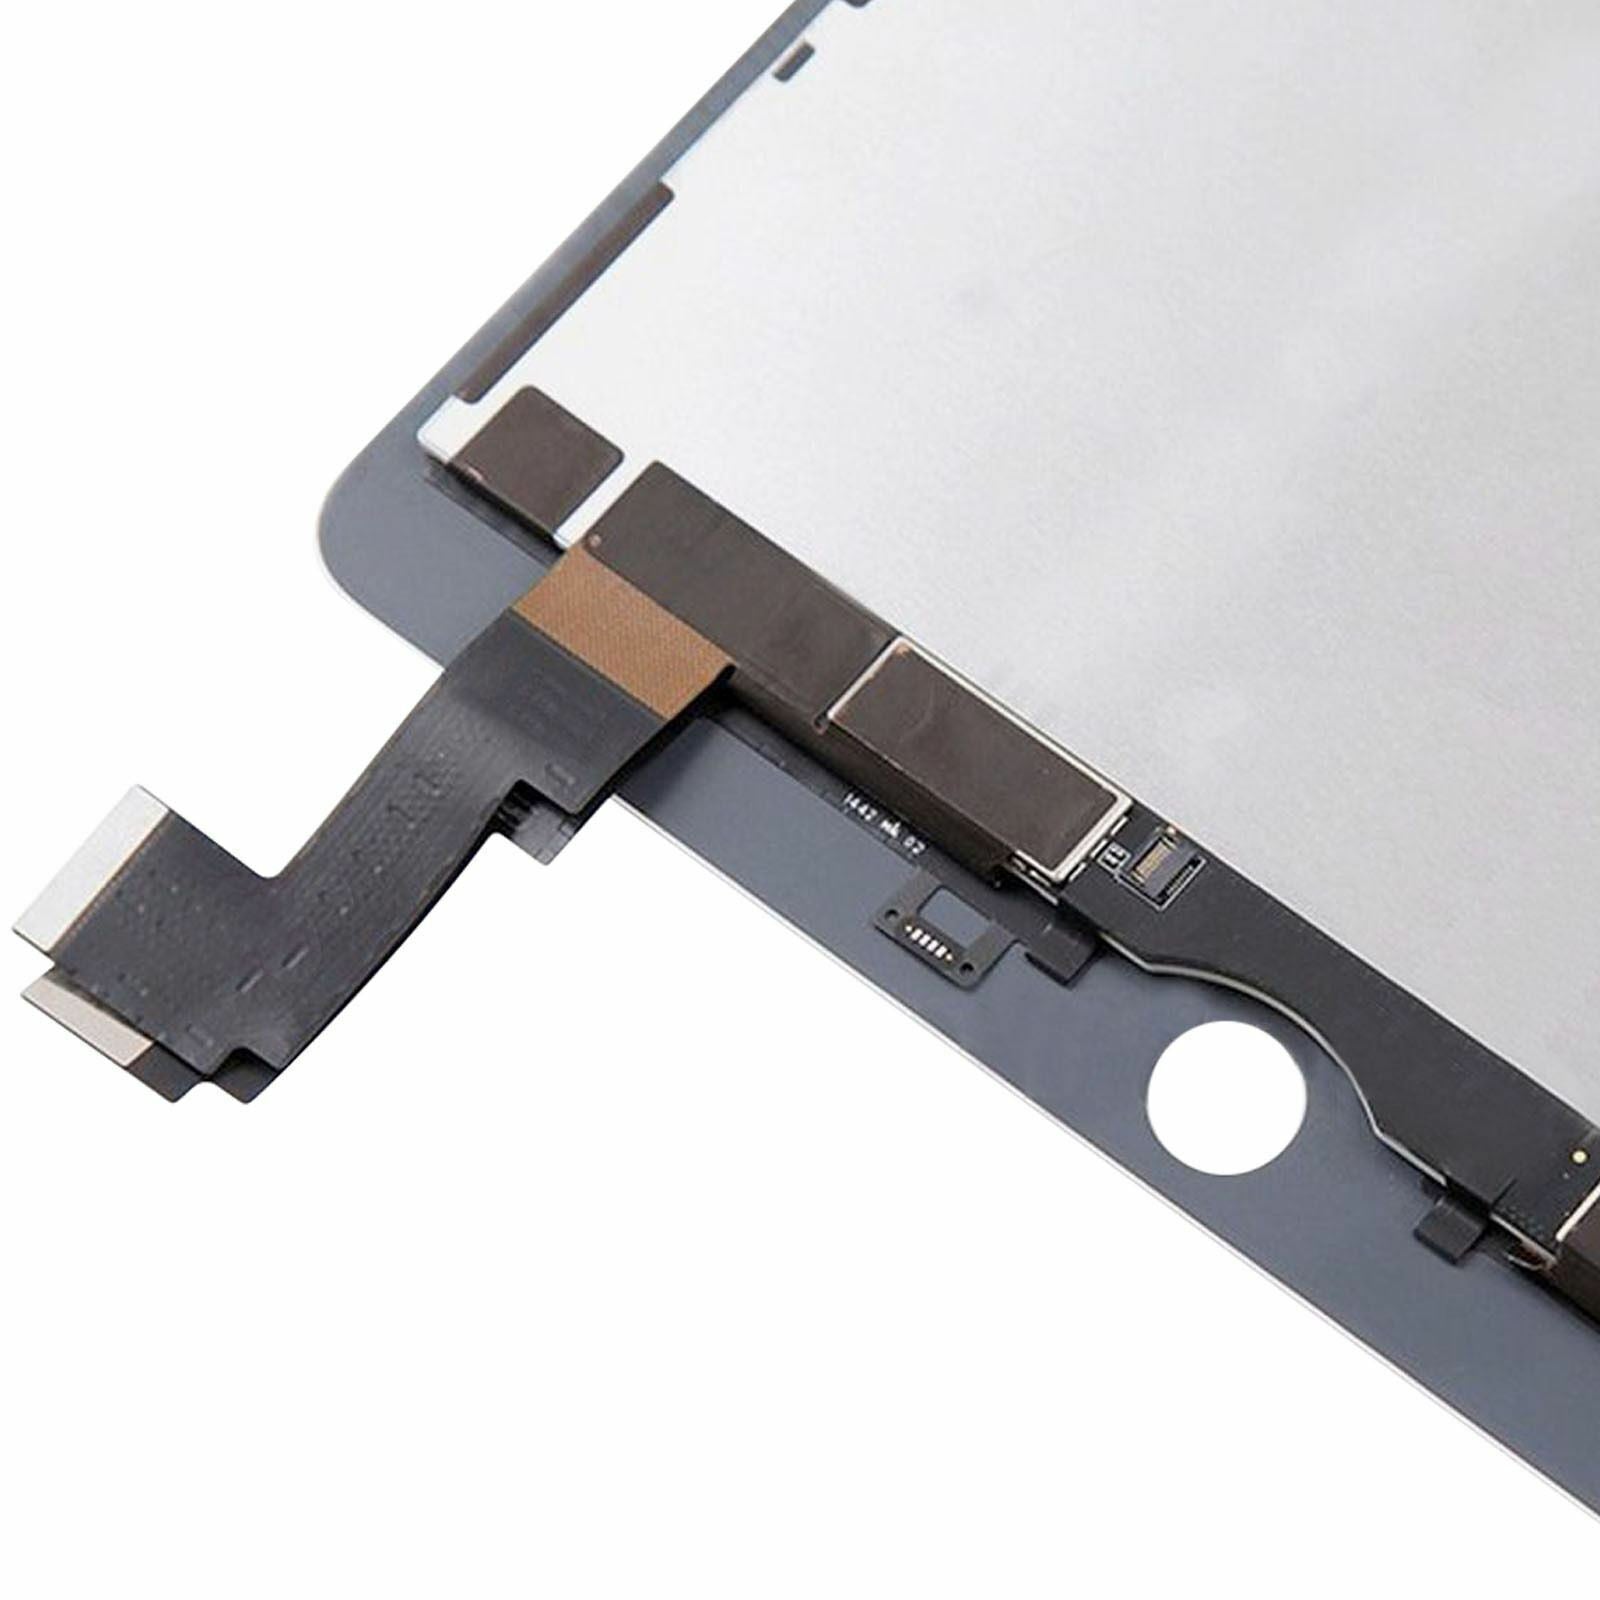 Apple iPad Air 2 / iPad 6 Replacement LCD Touch Screen Assembly - White for [product_price] - First Help Tech